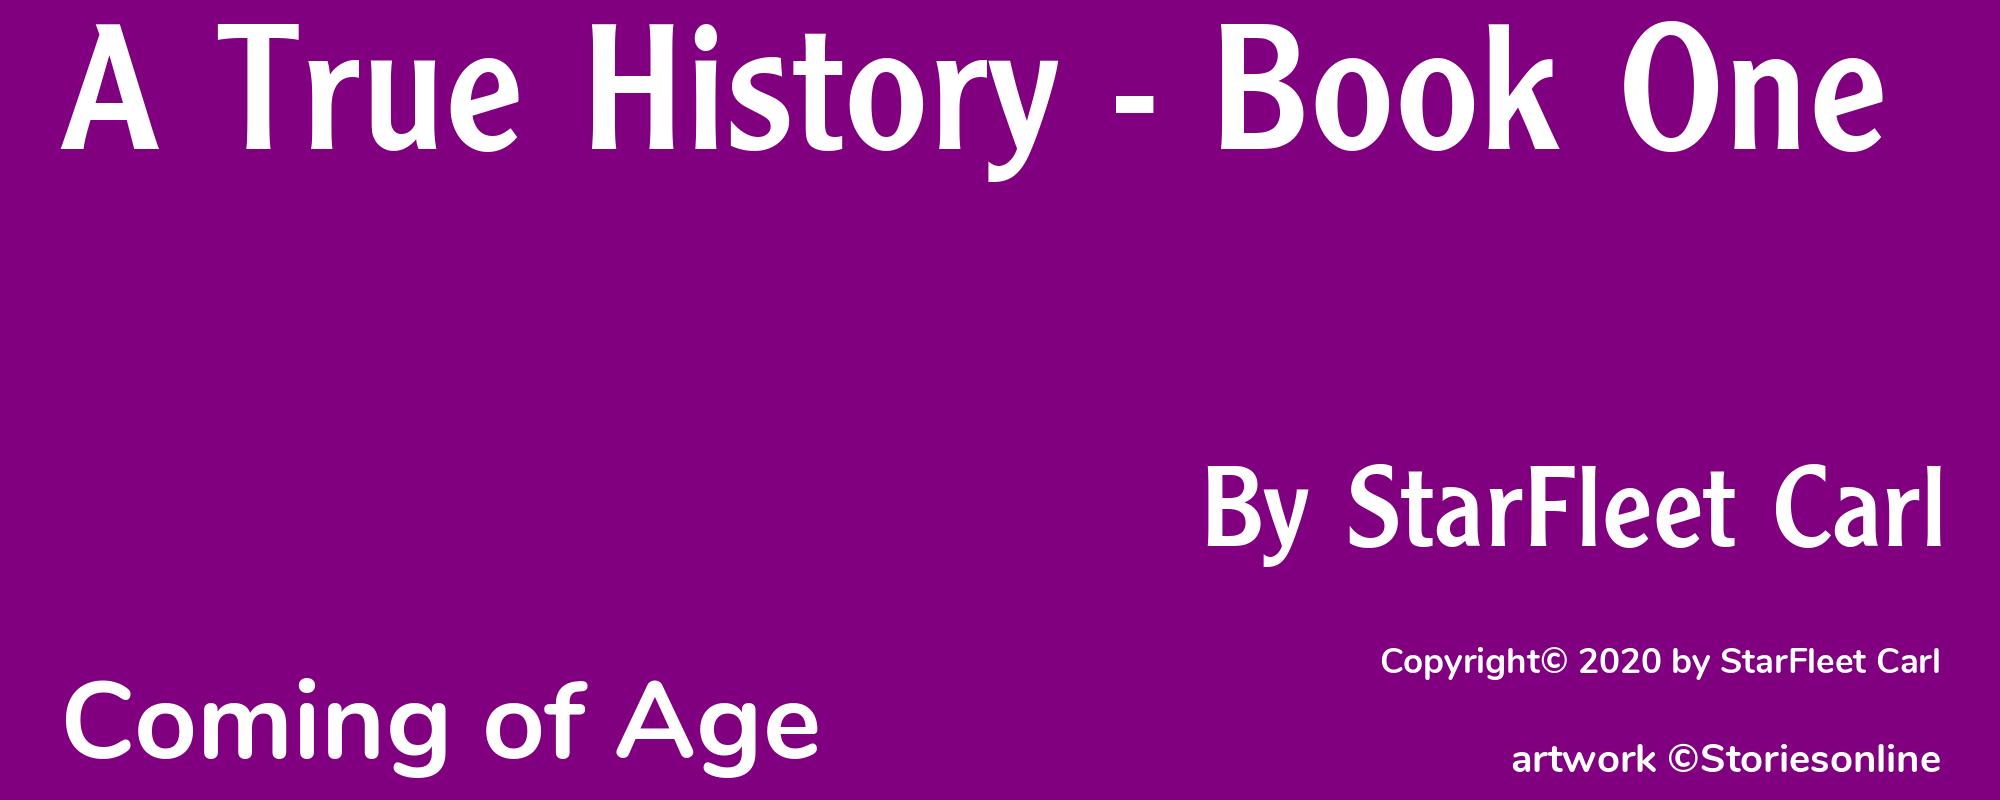 A True History - Book One - Cover